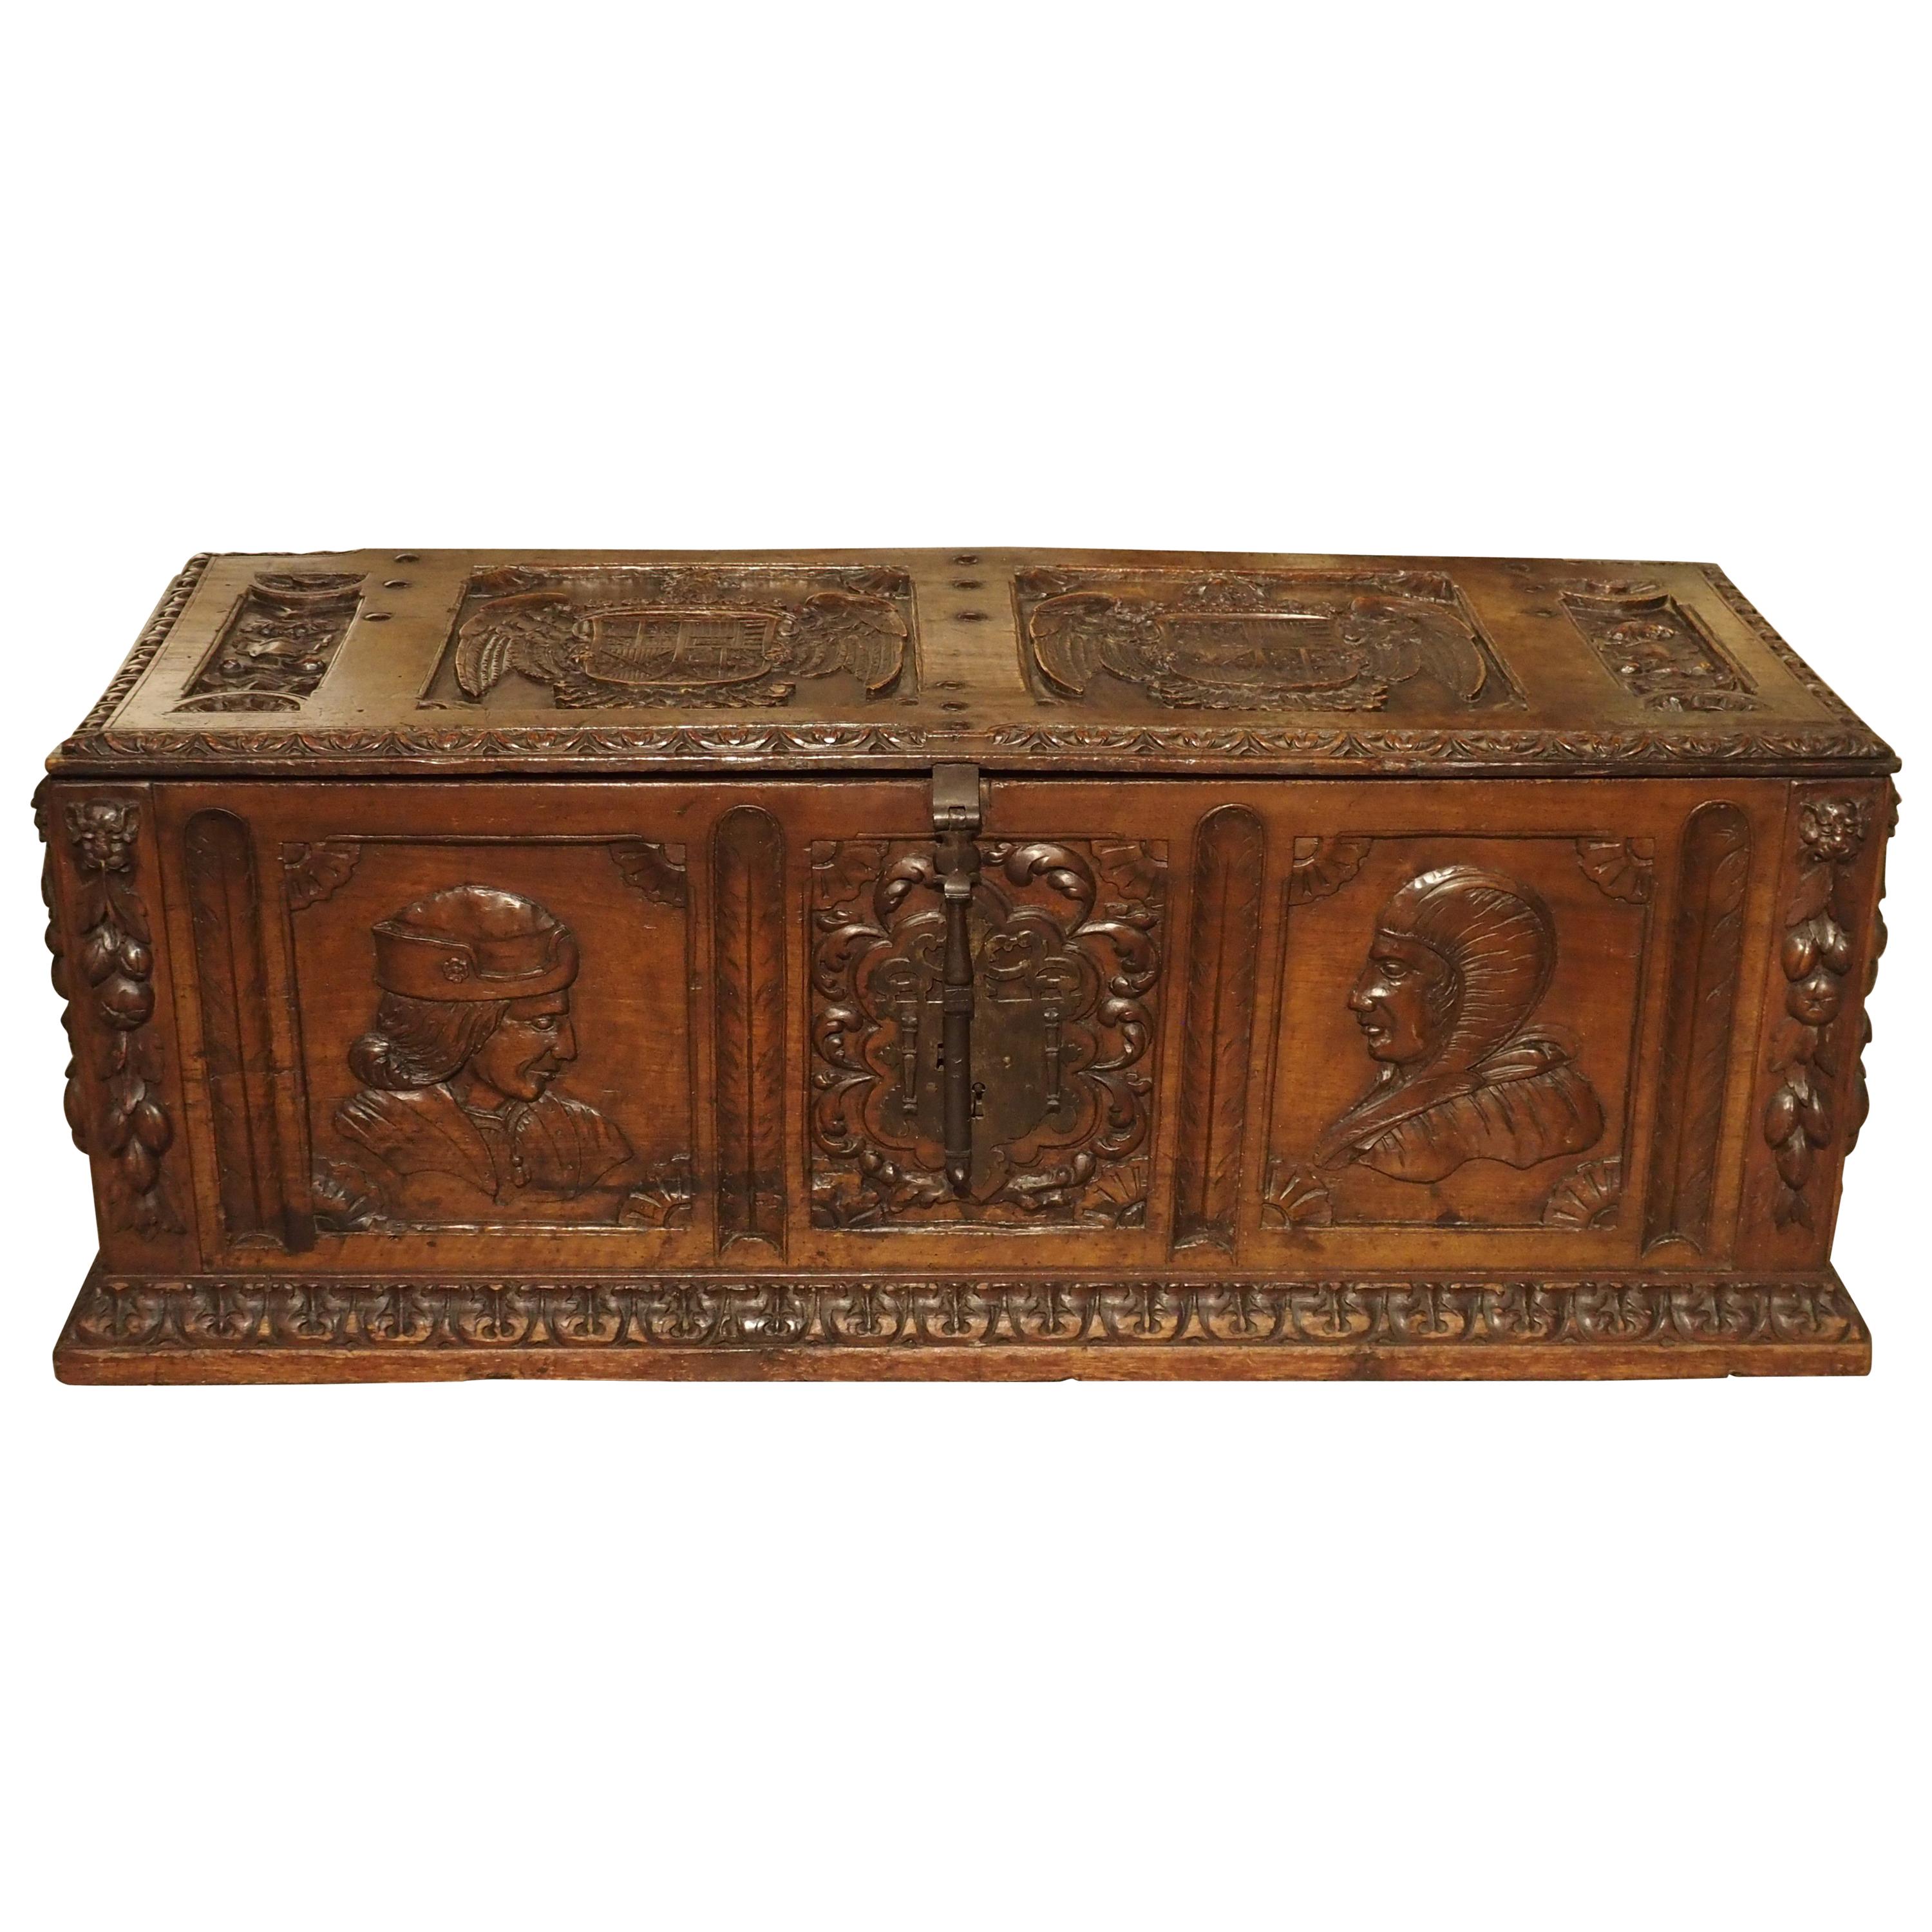 Antique Walnut Wood Renaissance Style Armorial Trunk from Spain